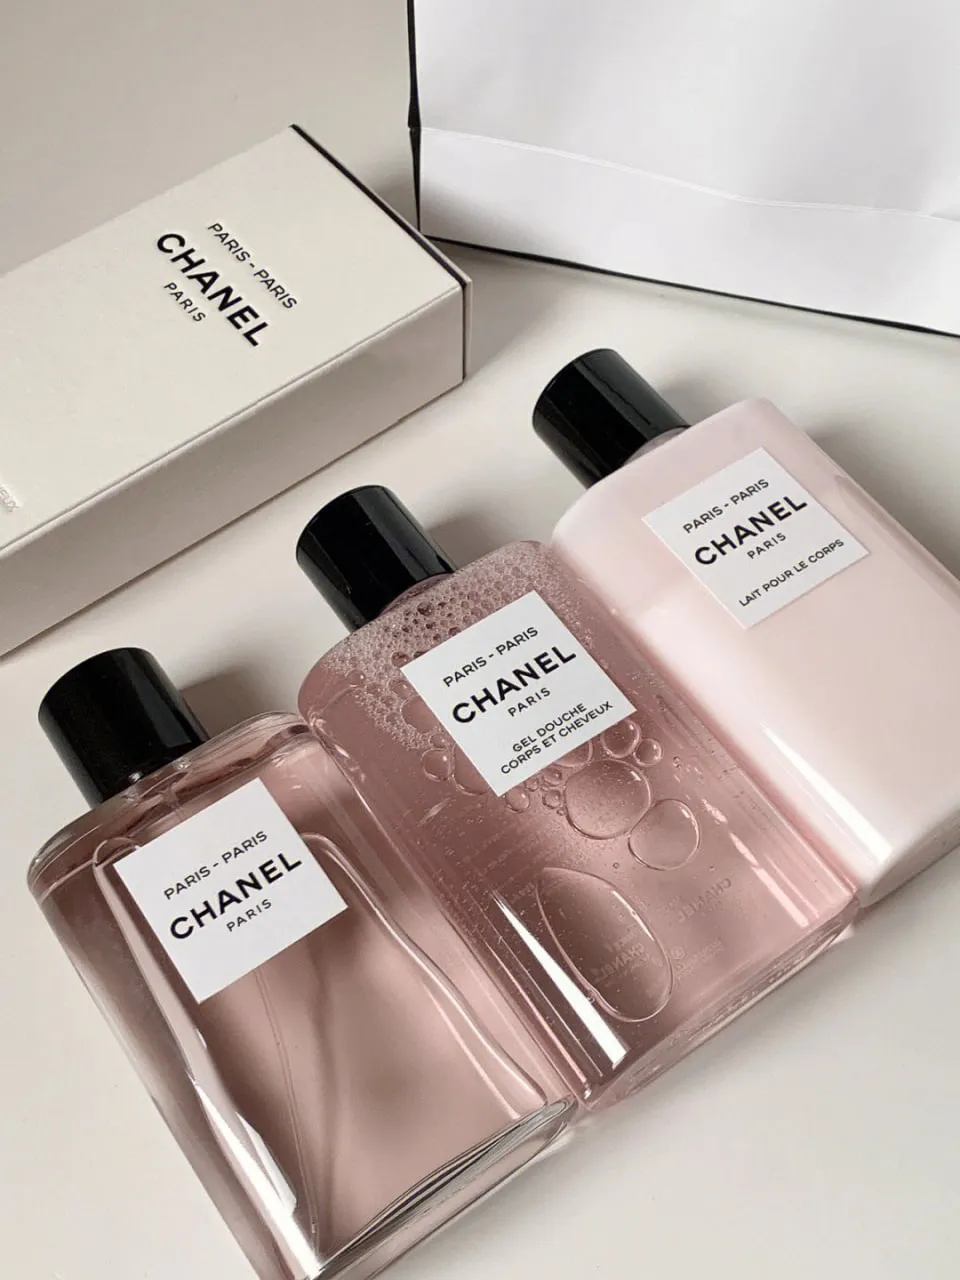 Chanel Paris, Shower Gel Product, Gallery posted by Emma Clover ✨